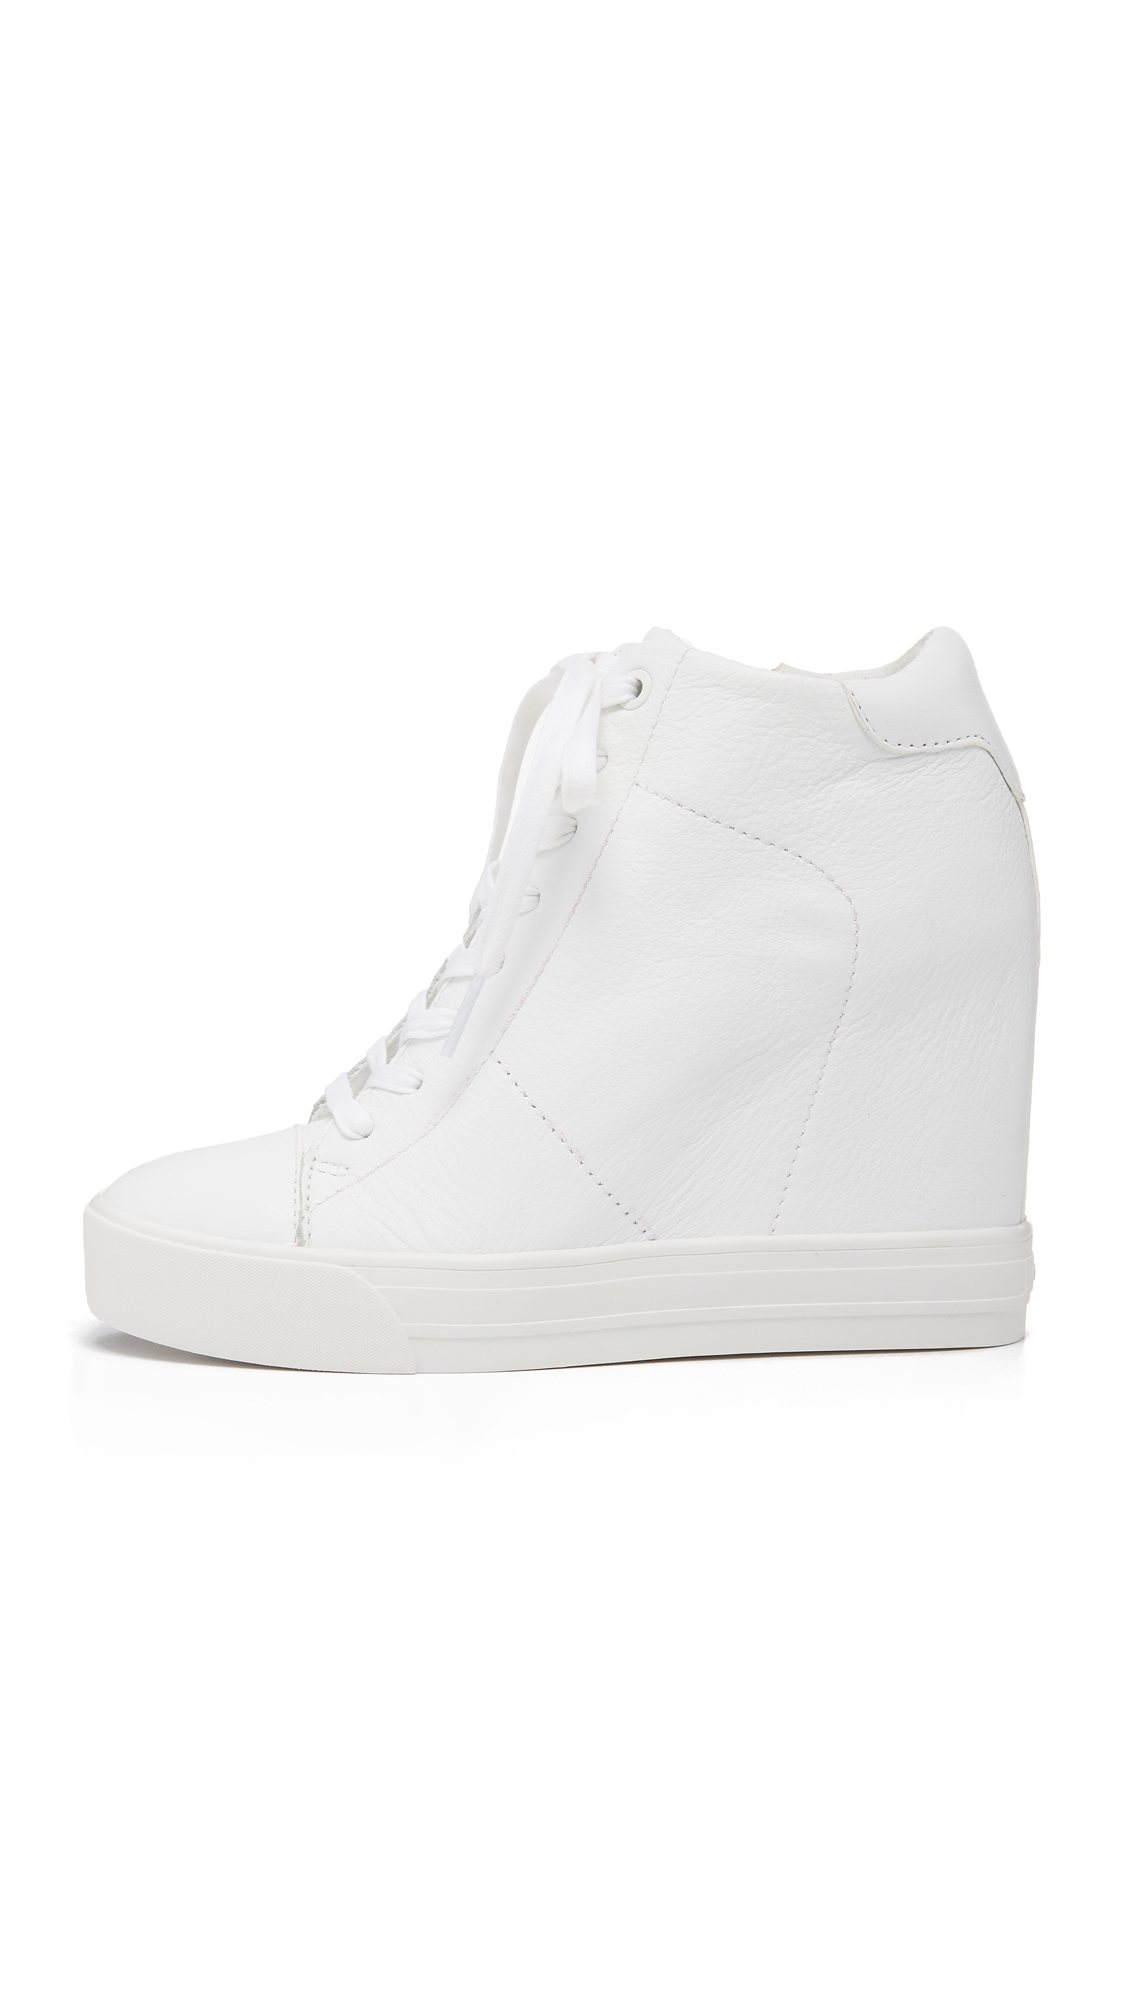 DKNY Ginnie Wedge Sneakers in White | Lyst